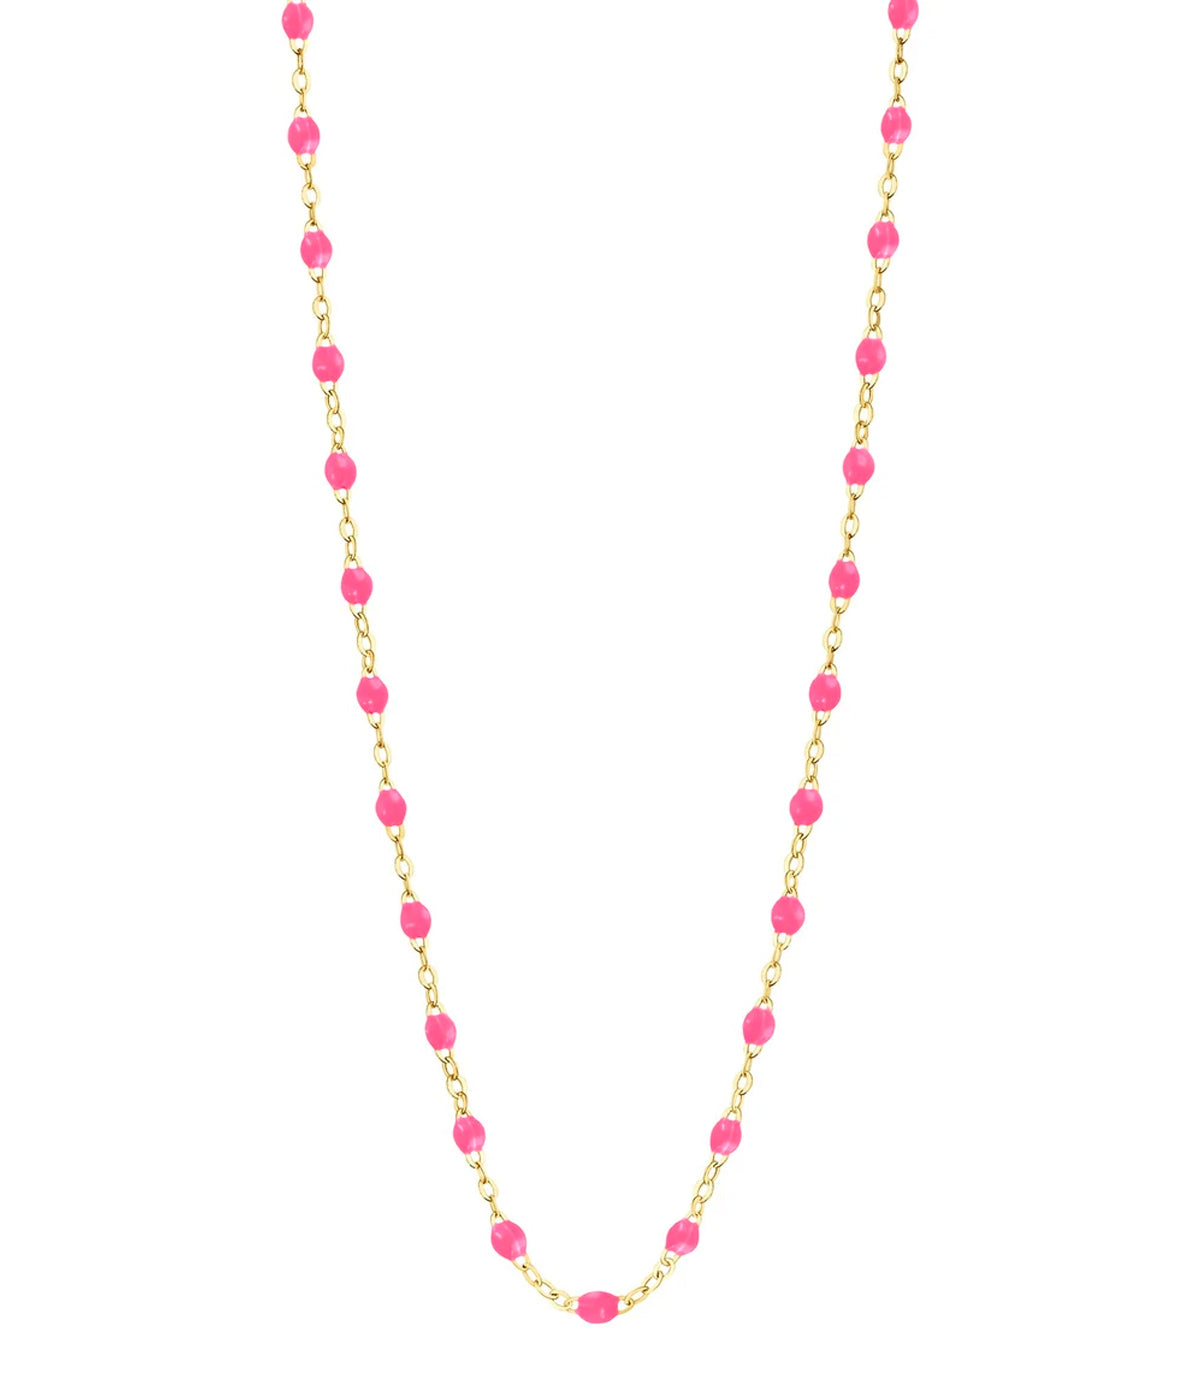 Classic Gigi 60cm Necklace in 18K Yellow Gold & Pink